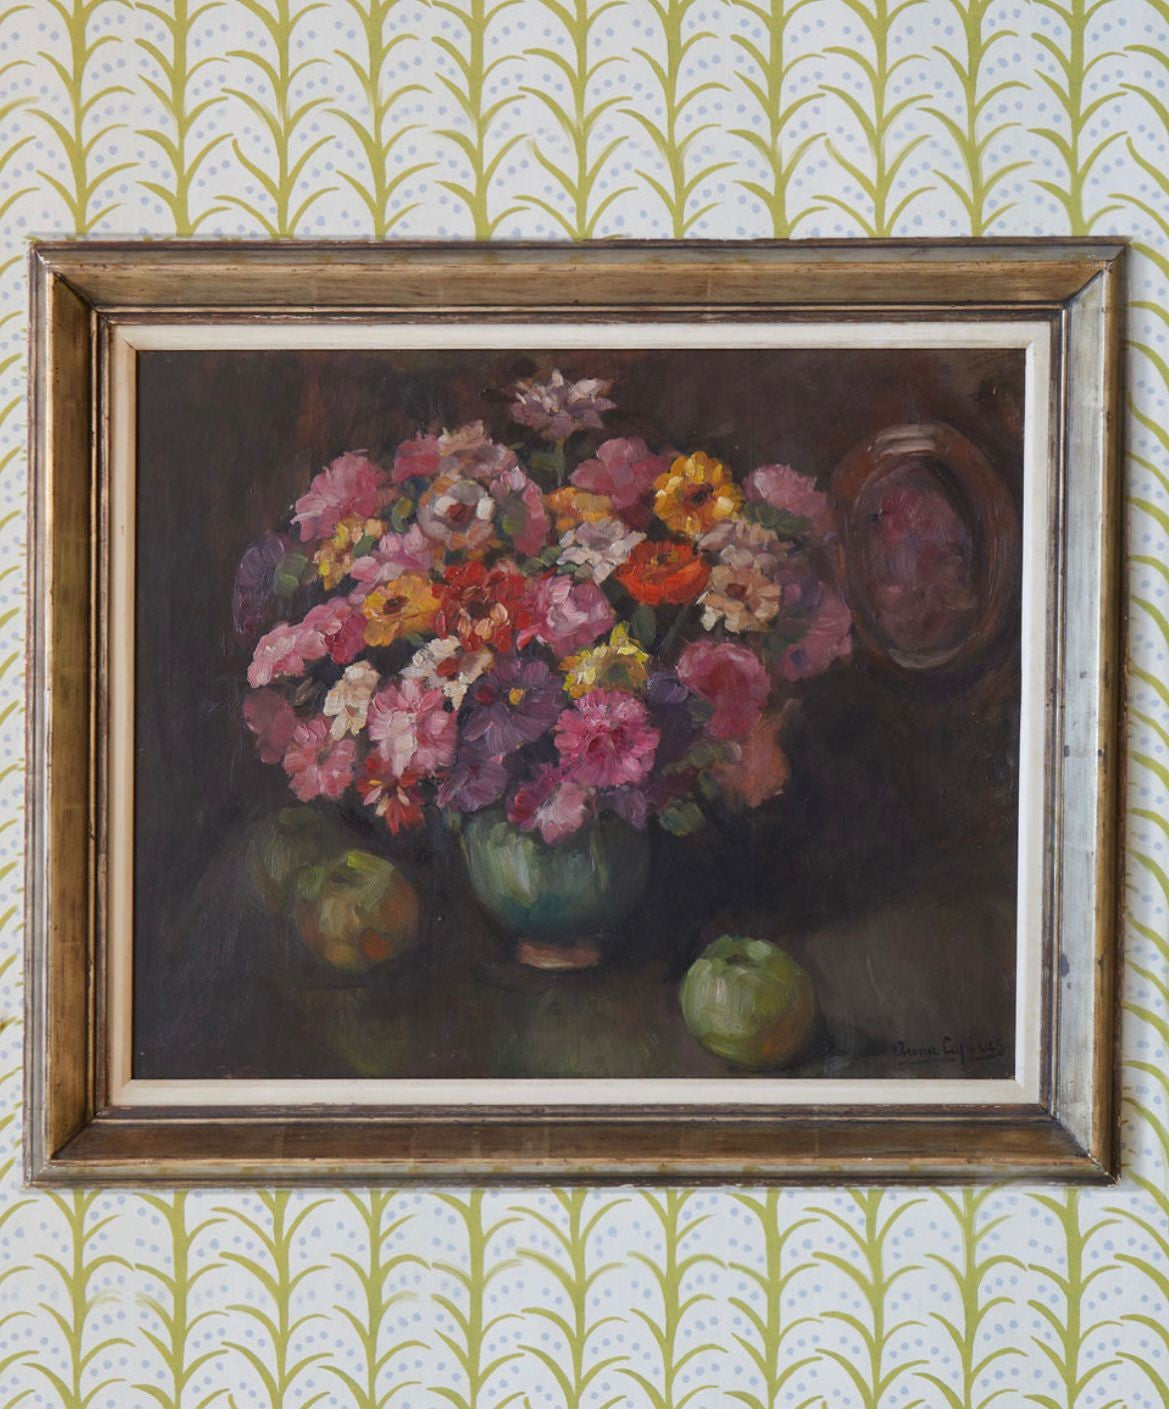 A Mid 20th Century Floral Still Life by Anna Cuperus